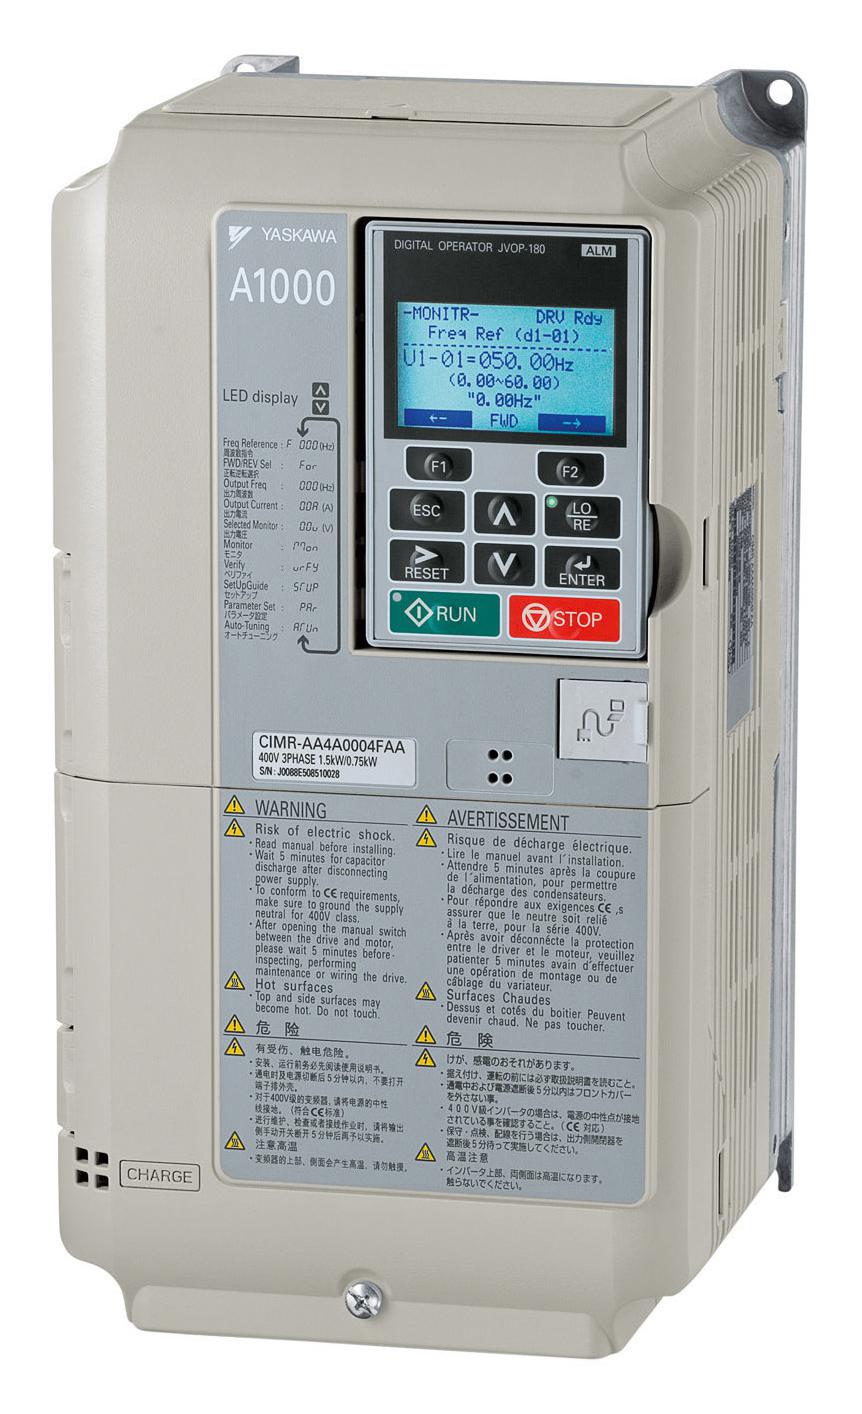 CIMR-AC4A0250AAA AC MOTOR SPEED CONTROLLERS OMRON